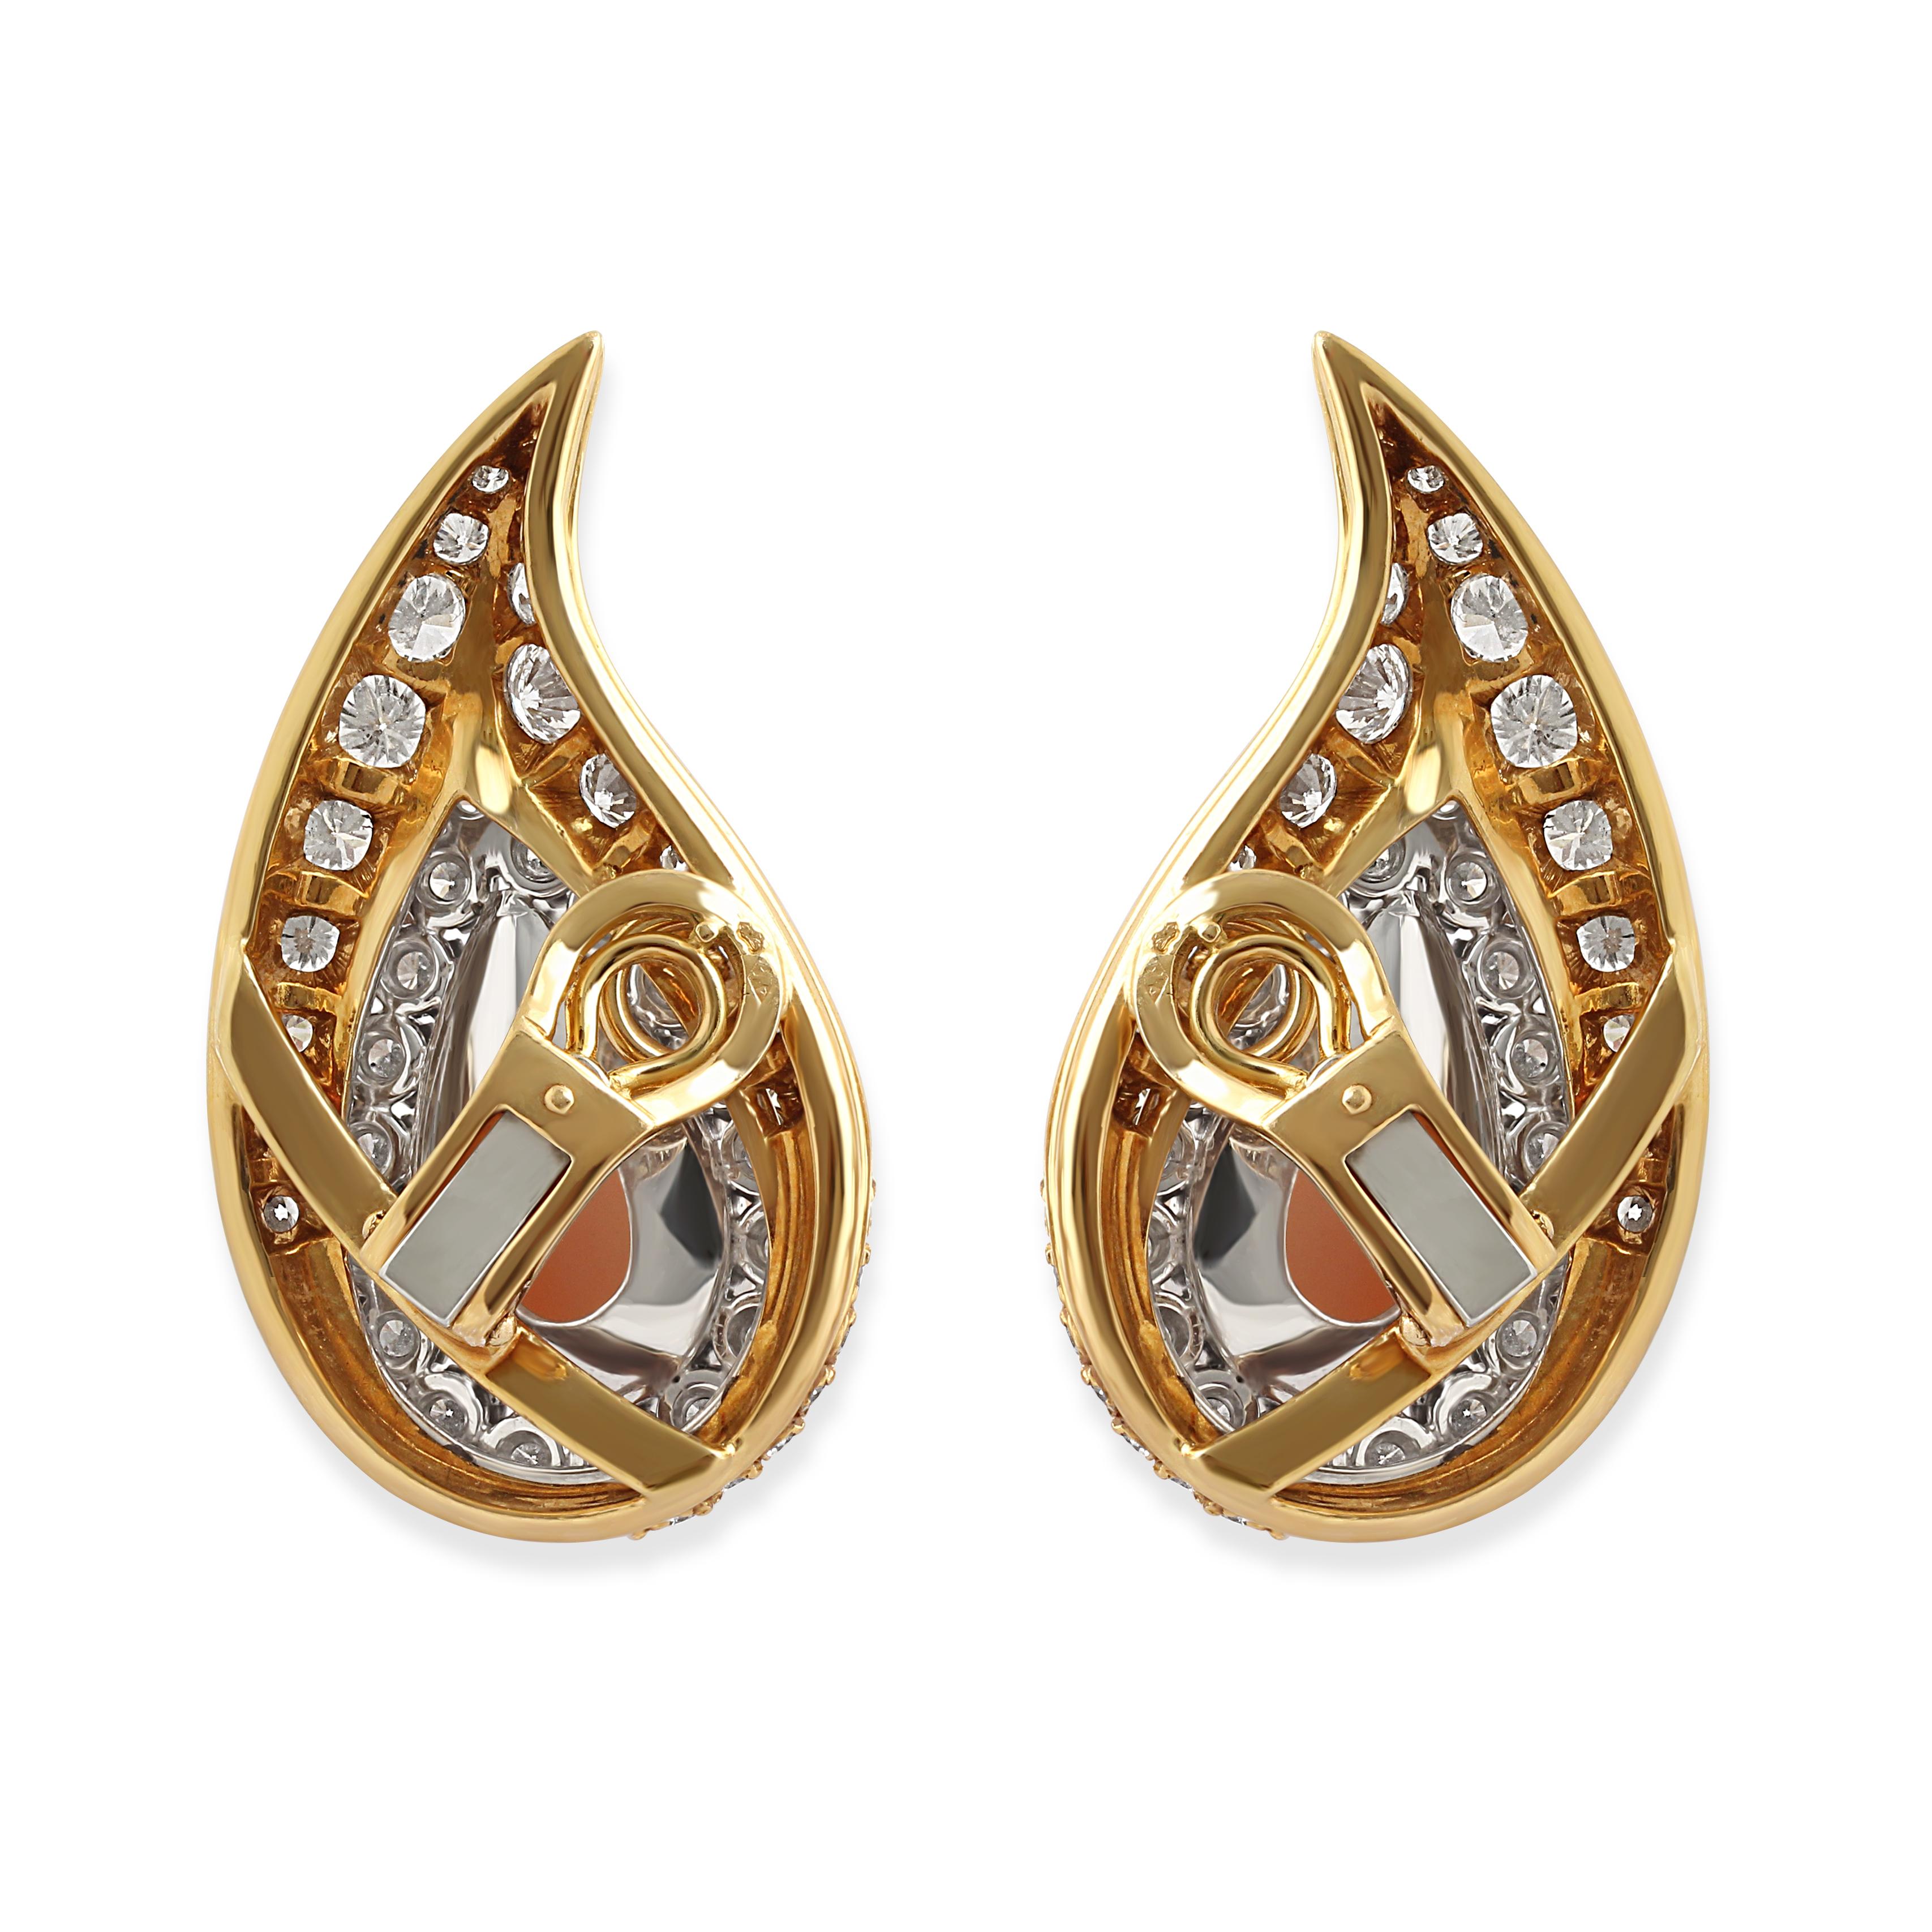 A pair of diamond and coral earrings in 18k gold. Set with pear-cut corals surrounded by round-cut diamonds crafted in an elegant tear drop design.